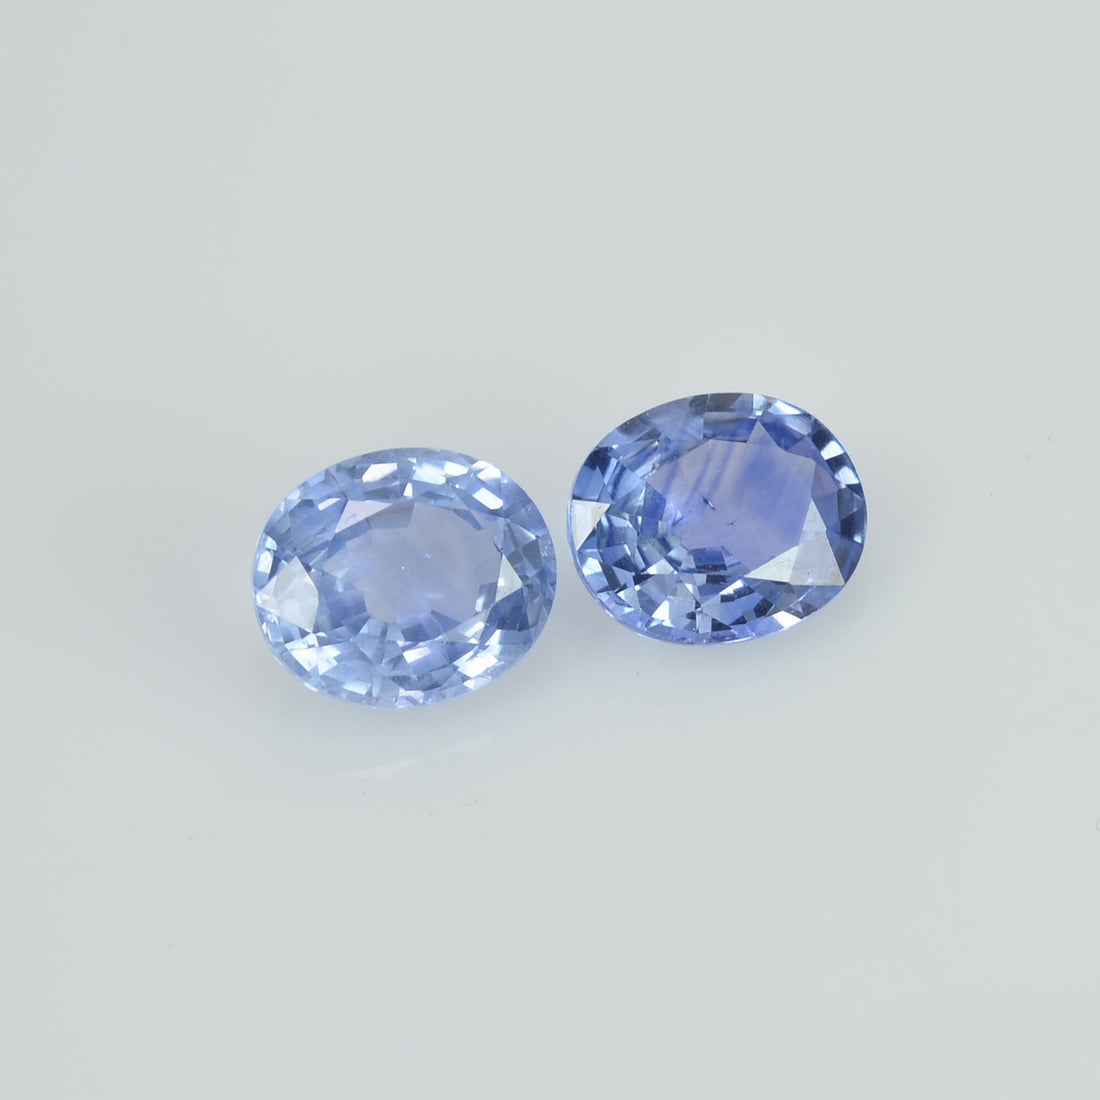 2.34 cts Natural Blue Sapphire Loose Pair Gemstone Oval Cut